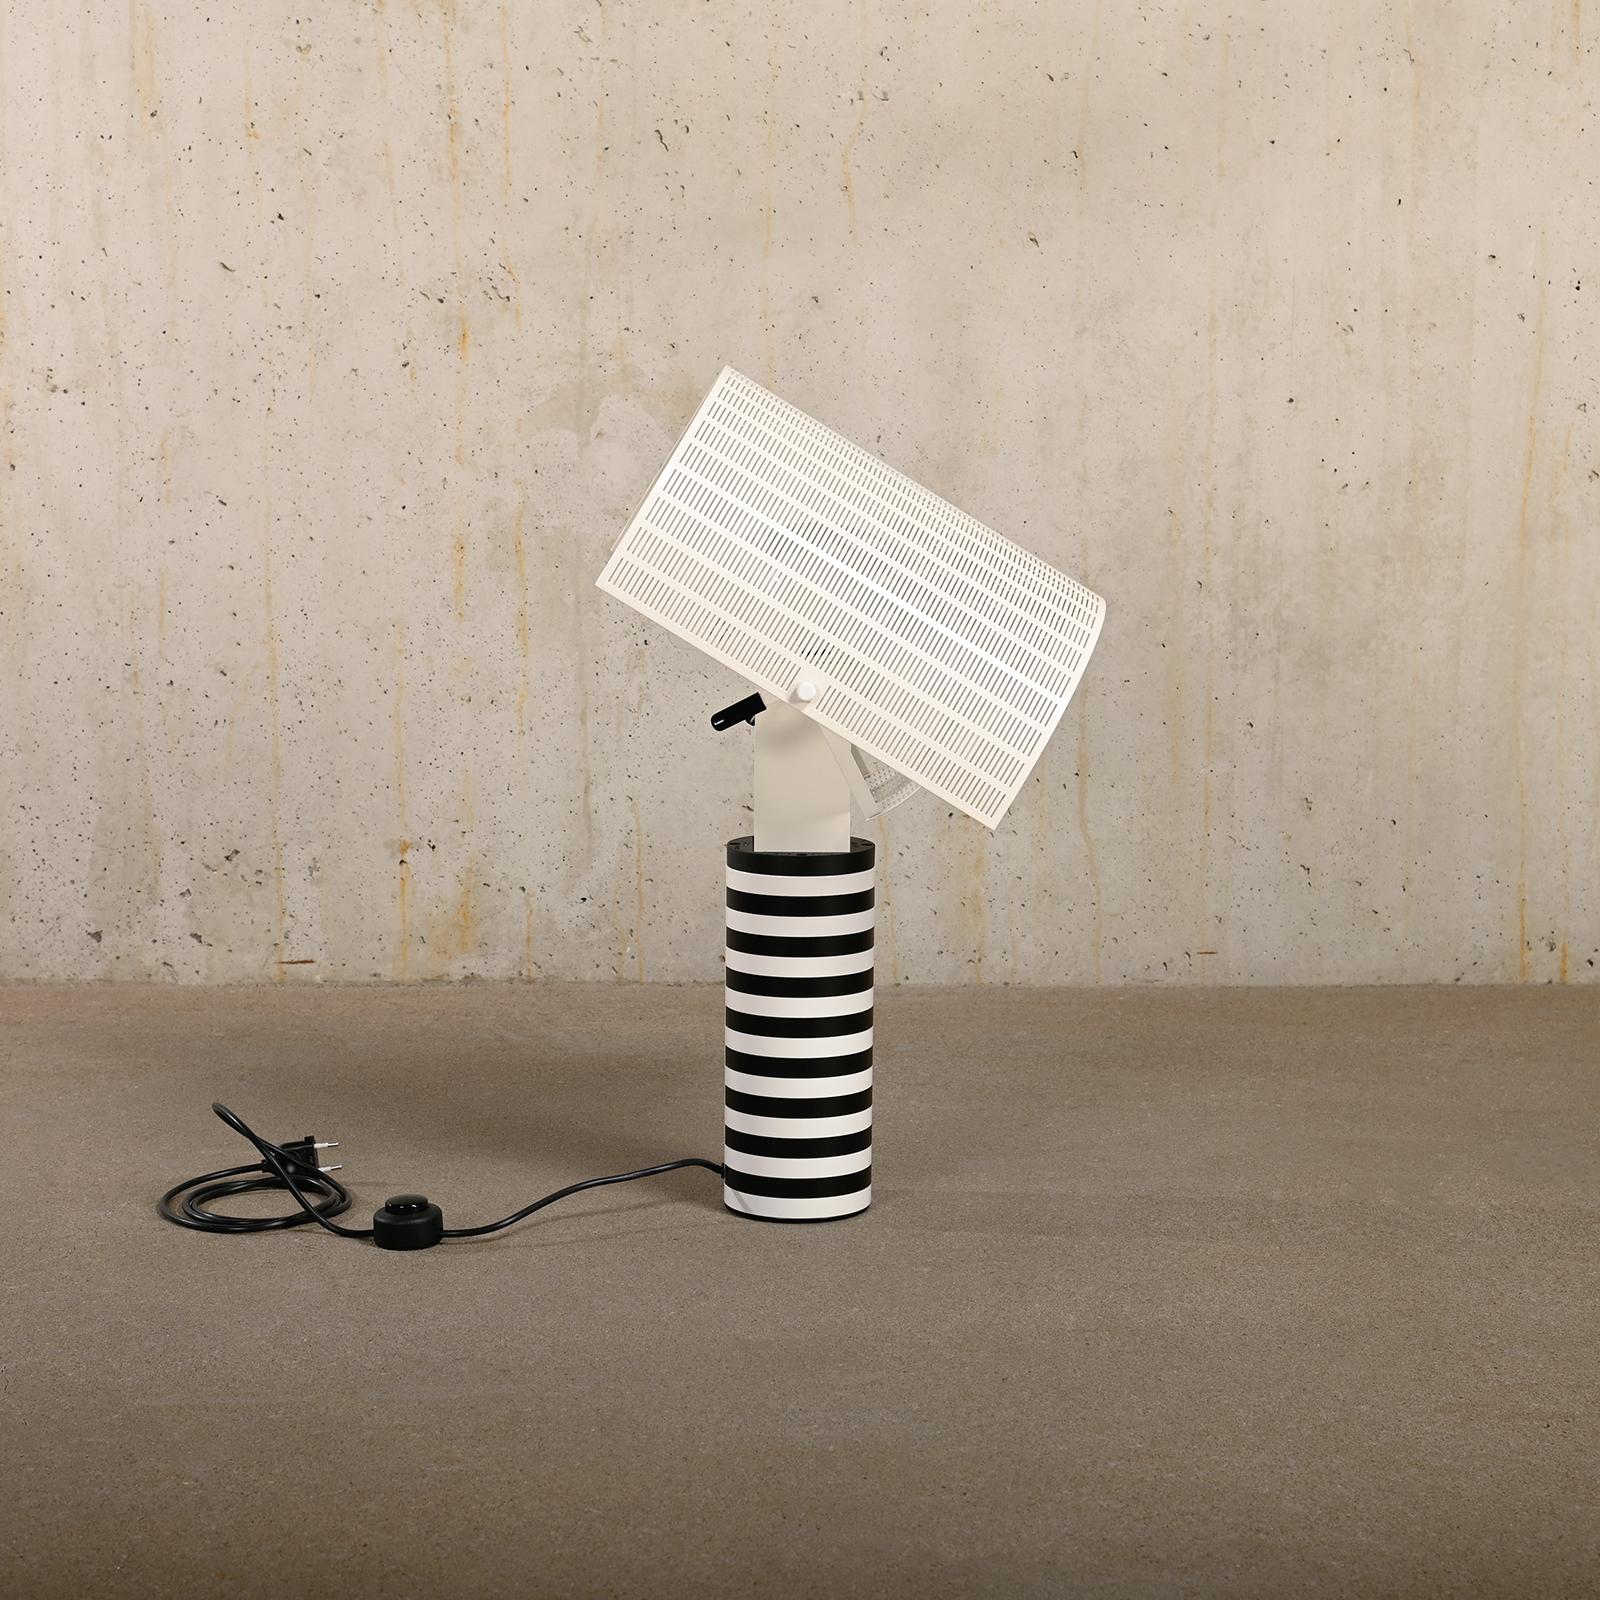 Late 20th Century Mario Botta Shogun Table Lamp in black and white for Artemide, Italy For Sale